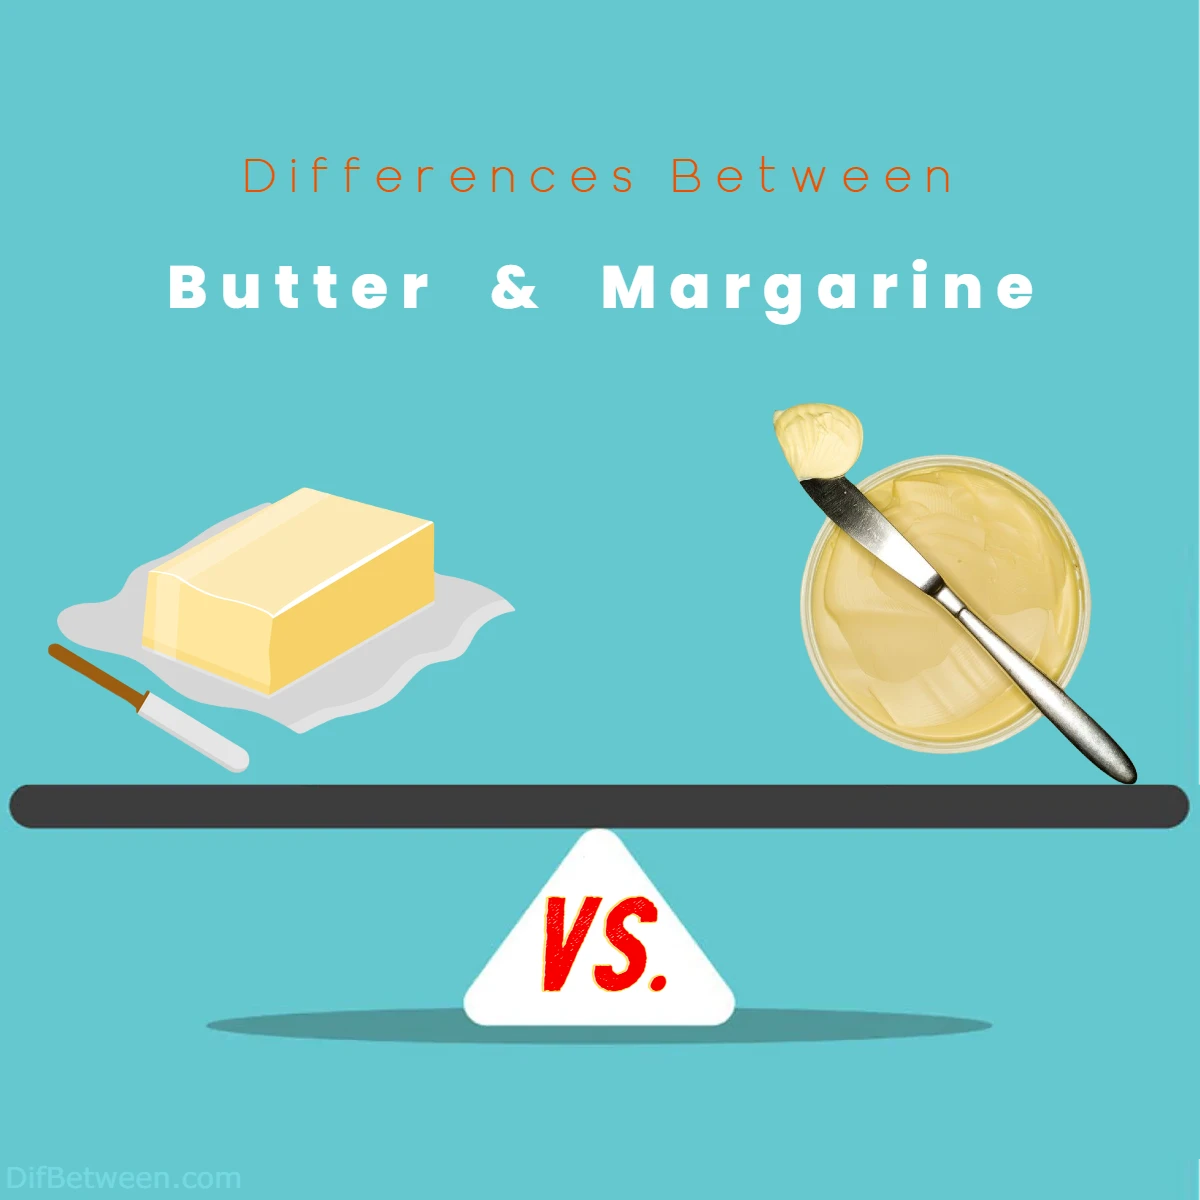 Differences Between Butter vs Margarine